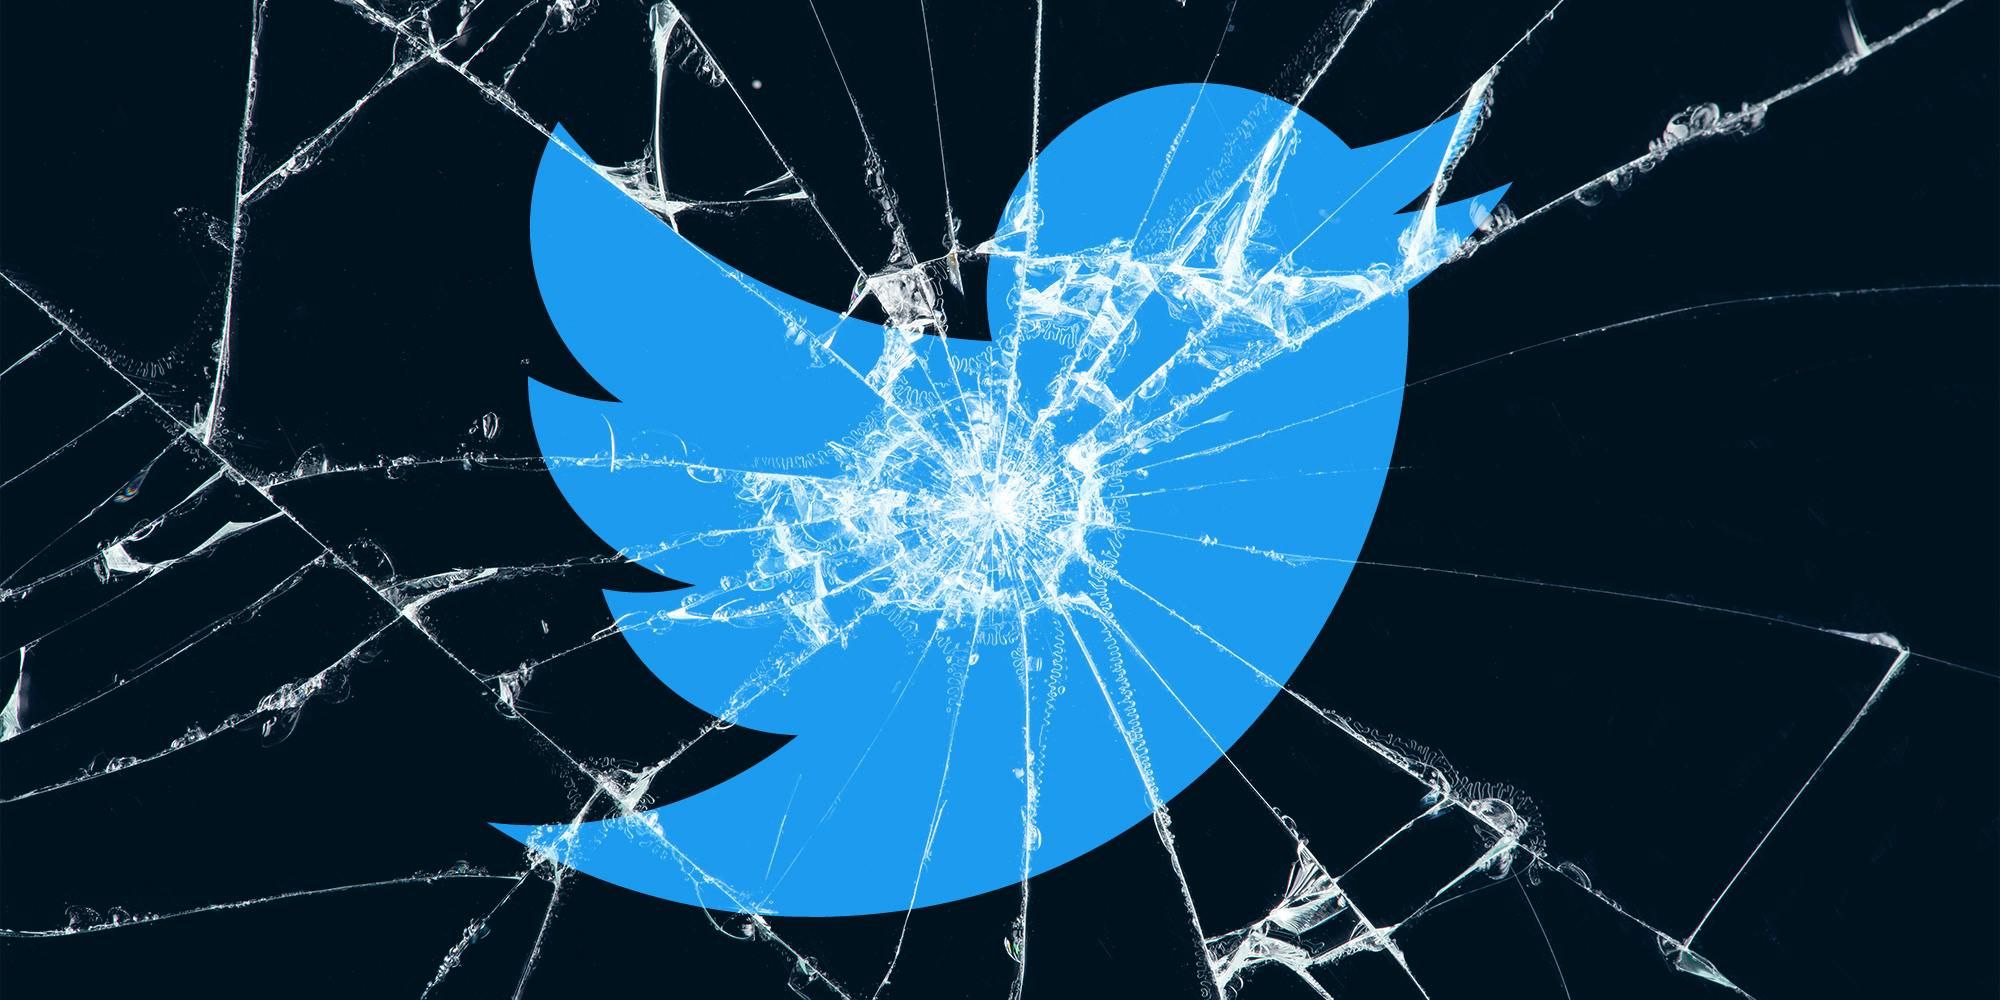 Twitter Descends Into Chaos After Tweets, DMs Stop Working